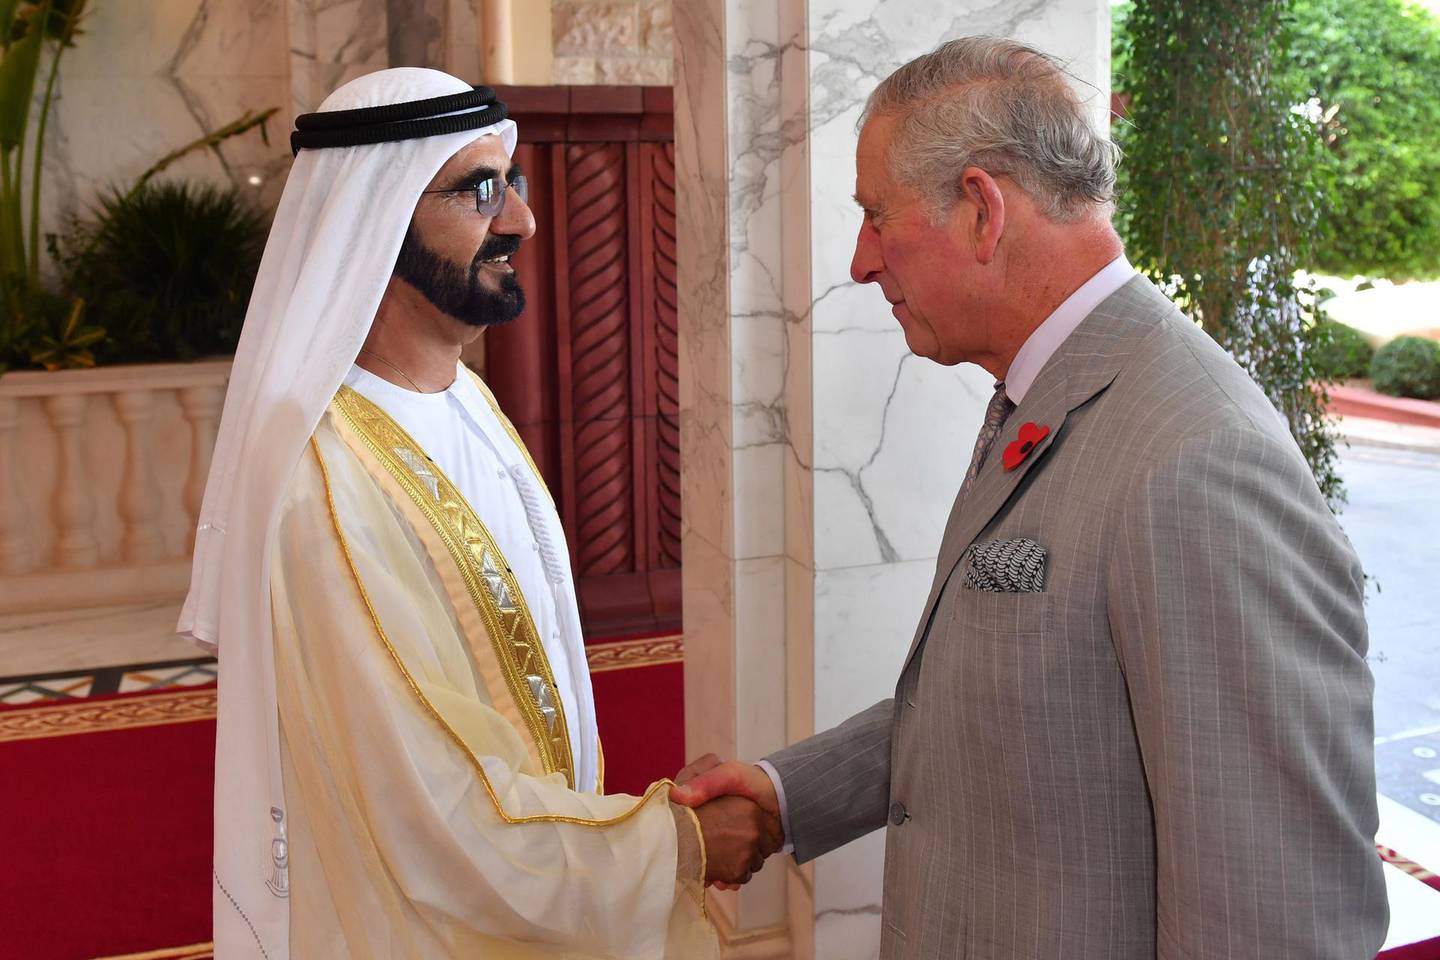 A handout picture taken by the Government of Dubai Media Office on November 8, 2016, shows UAE Prime Minister and Ruler of Dubai, Sheikh Mohammed bin Rashid al-Maktoum (L), shaking hands with Prince Charles of the United Kingdom (R) while on a three-day official visit to the Gulf country. (Photo by HO / GOVERNMENT OF DUBAI MEDIA OFFICE / AFP) / == RESTRICTED TO EDITORIAL USE - MANDATORY CREDIT "AFP PHOTO / HO / GOVERNMENT OF DUBAI MEDIA OFFICE" - NO MARKETING NO ADVERTISING CAMPAIGNS - DISTRIBUTED AS A SERVICE TO CLIENTS ==